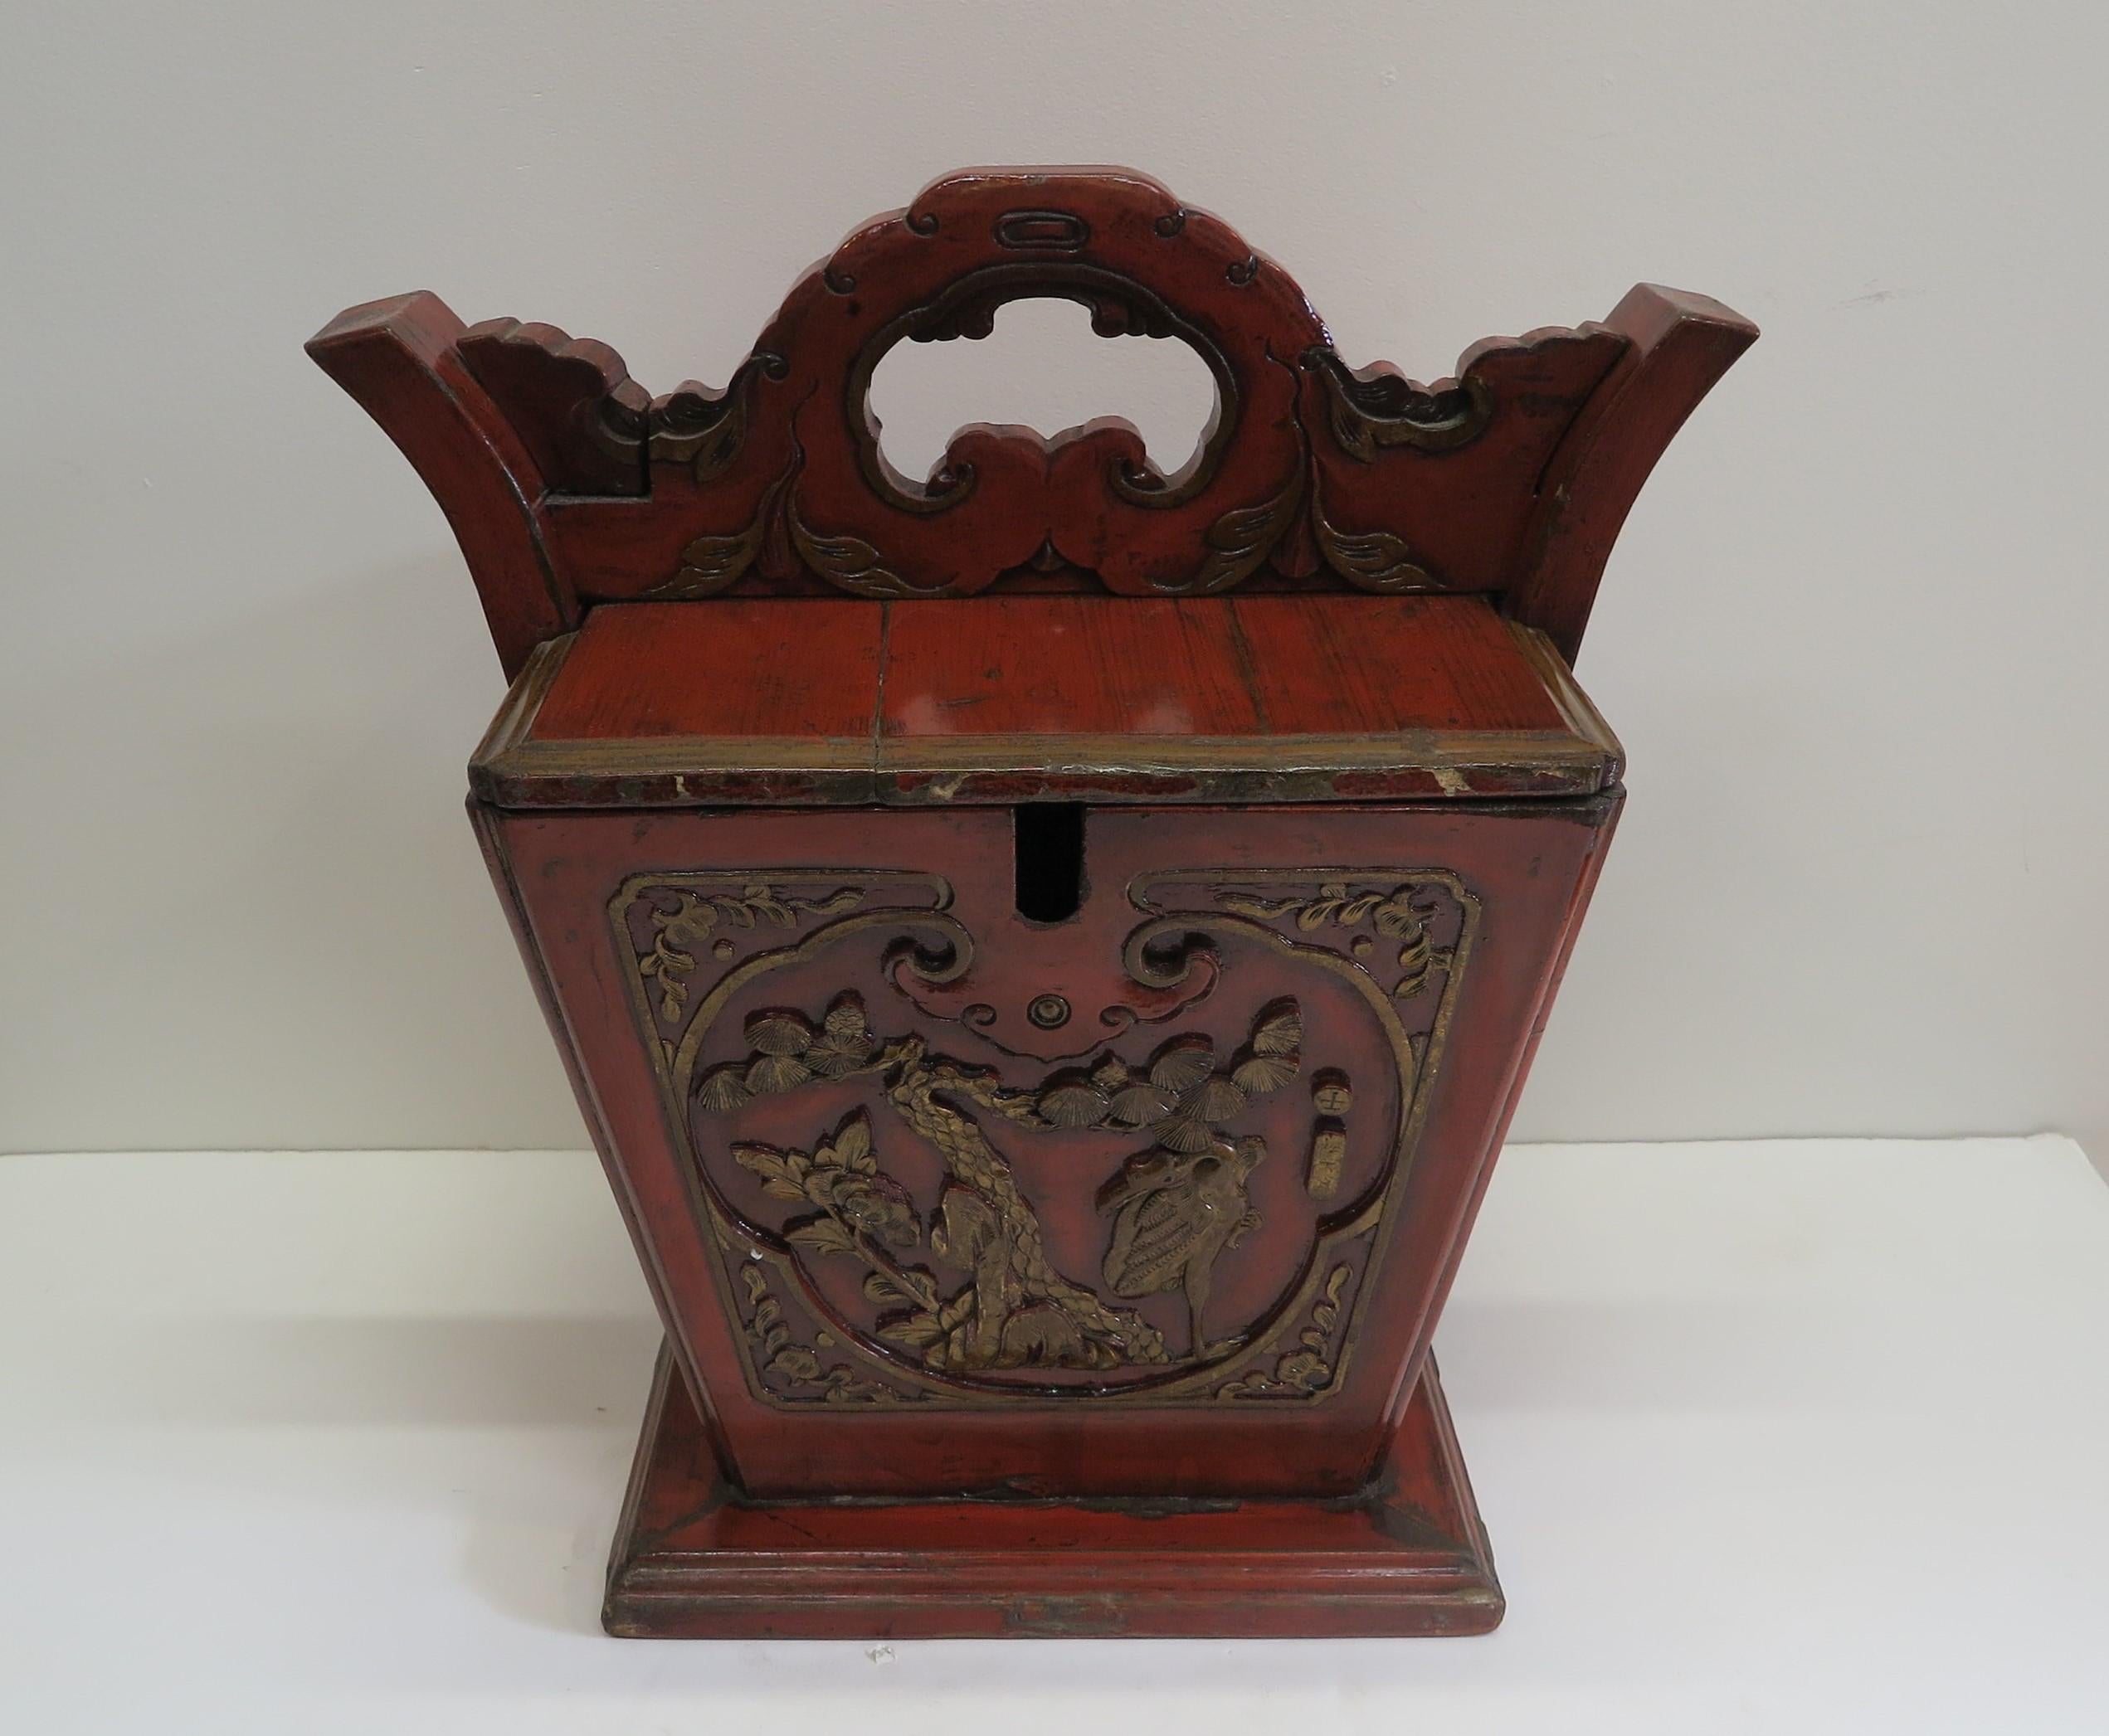 Antique Chinese Tea Caddy. Late 19th century early 20th century Elm Wood carved gilt red lacquered tea caddy. In very good condition a beautiful example. Tea caddies of this larger size where mostly used for large gatherings. Holding a large tea pot